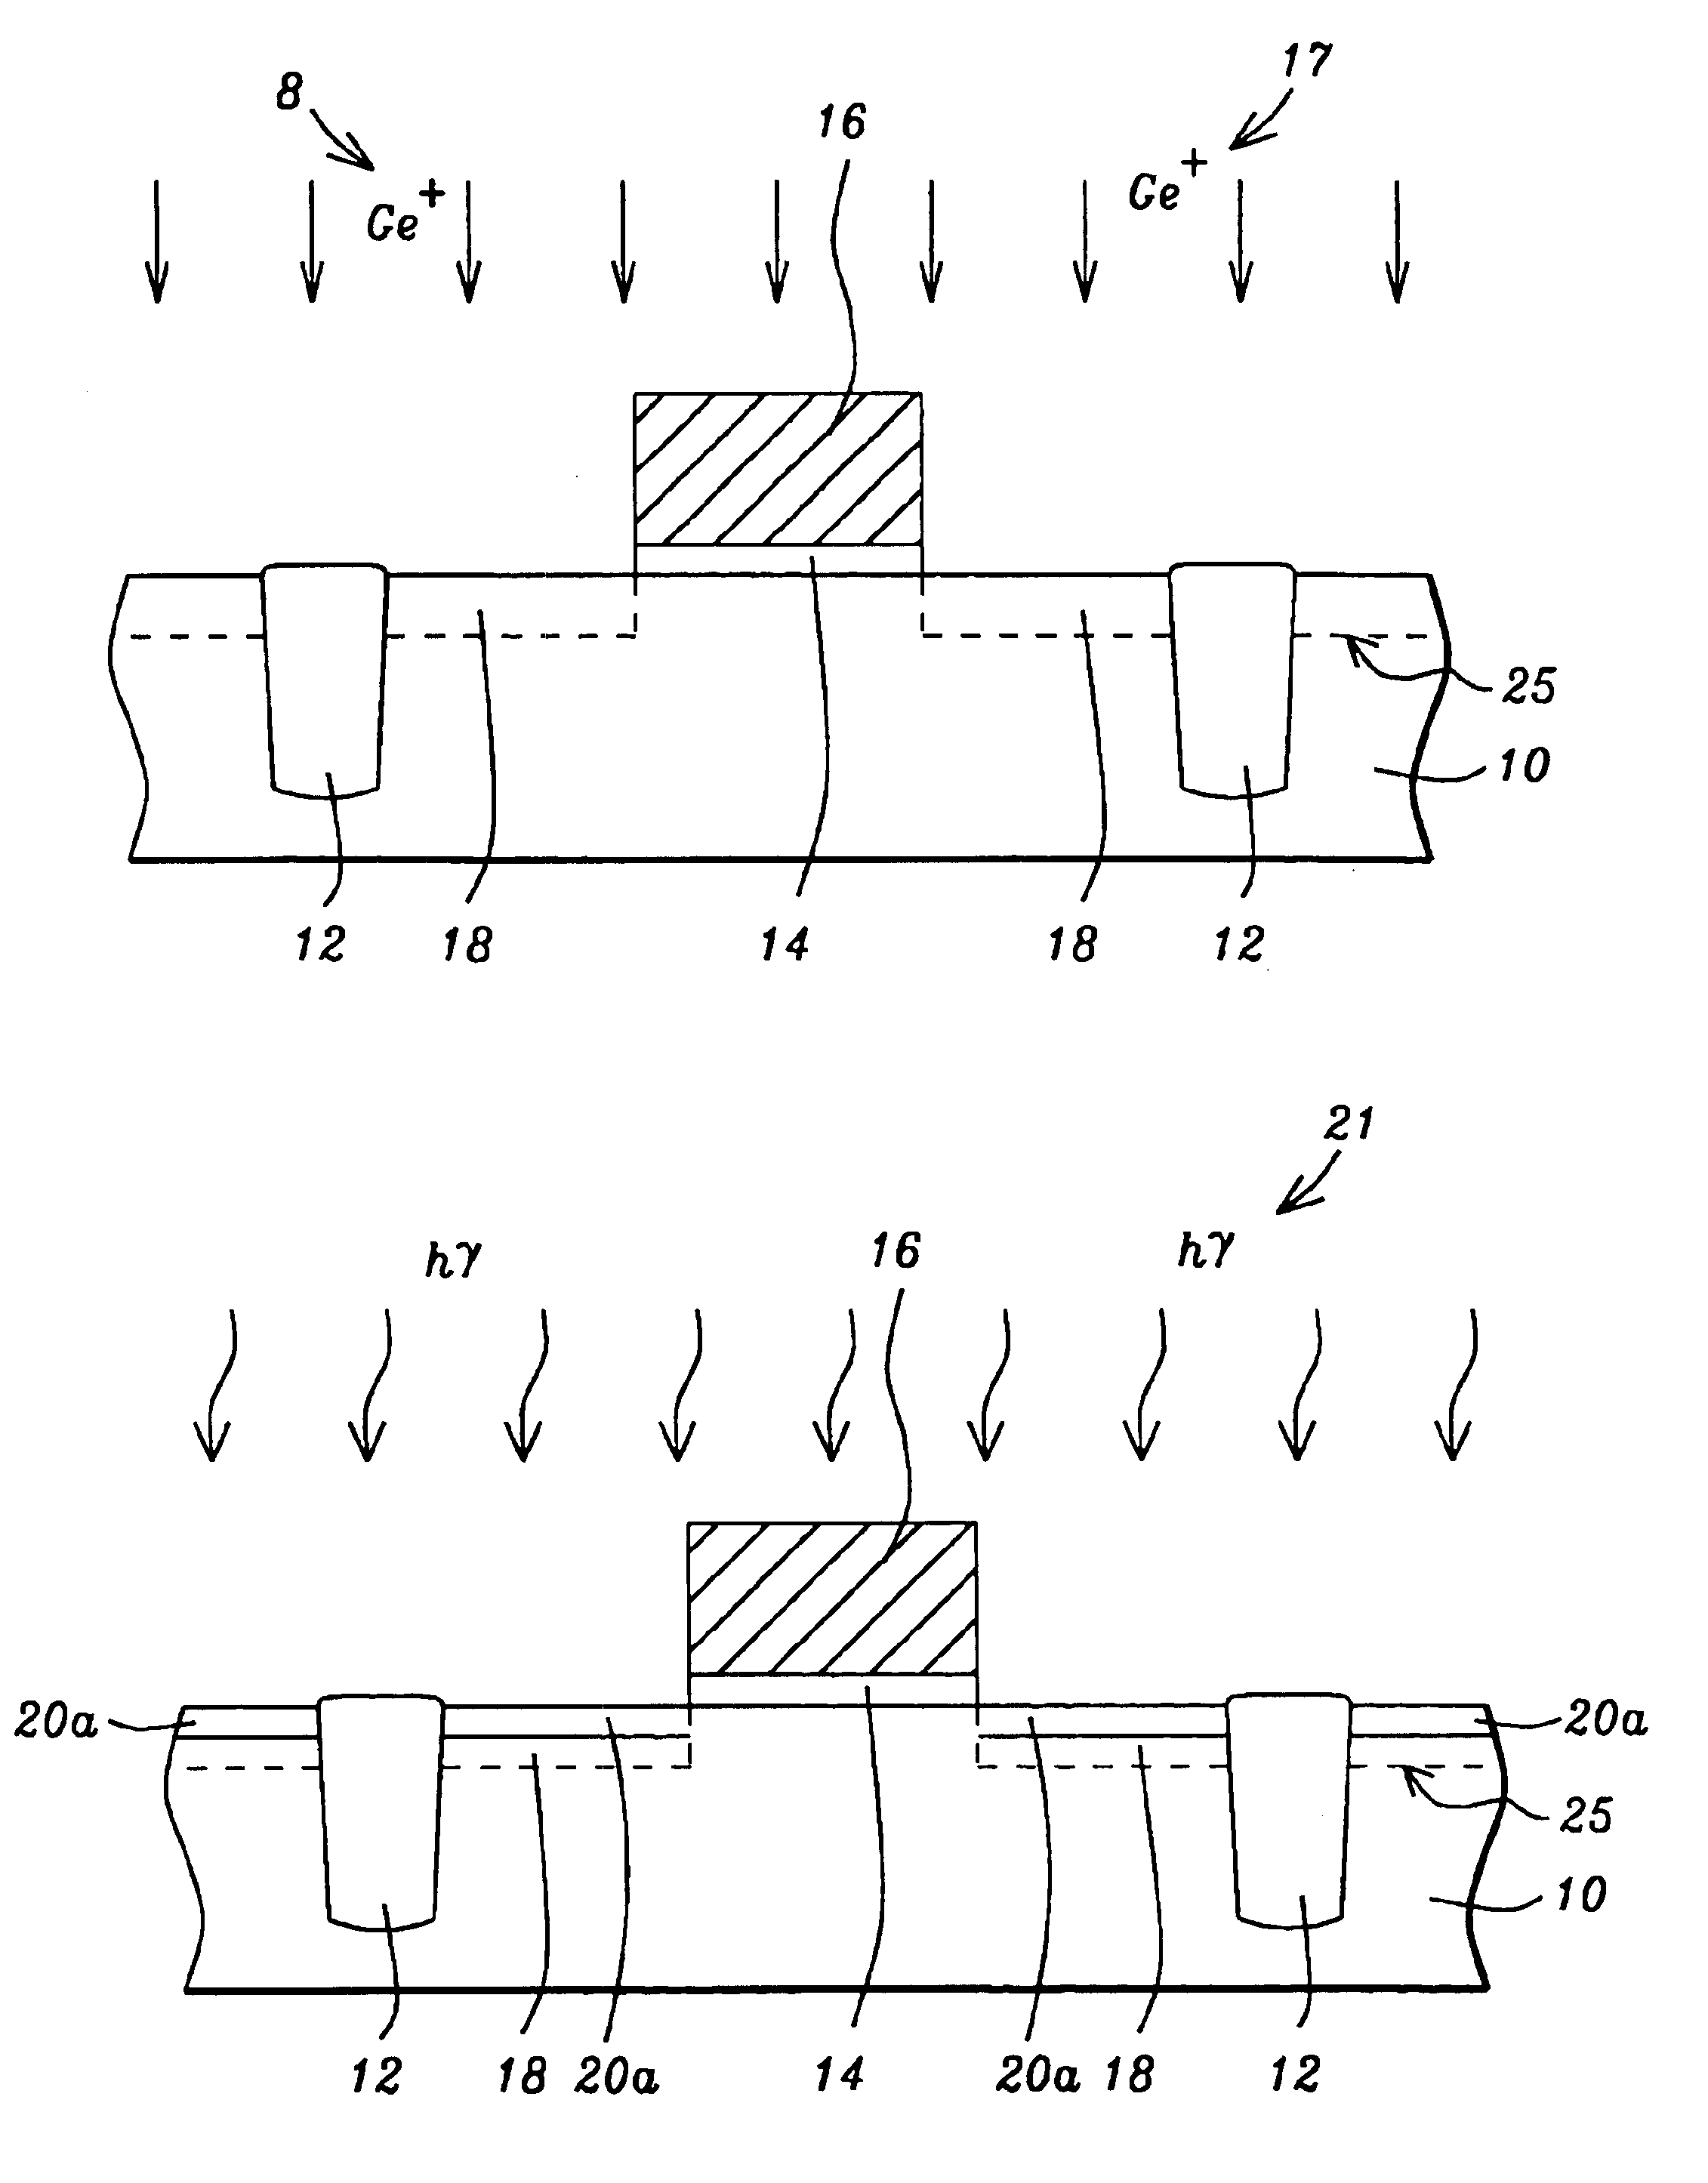 Method of multiple pulse laser annealing to activate ultra-shallow junctions